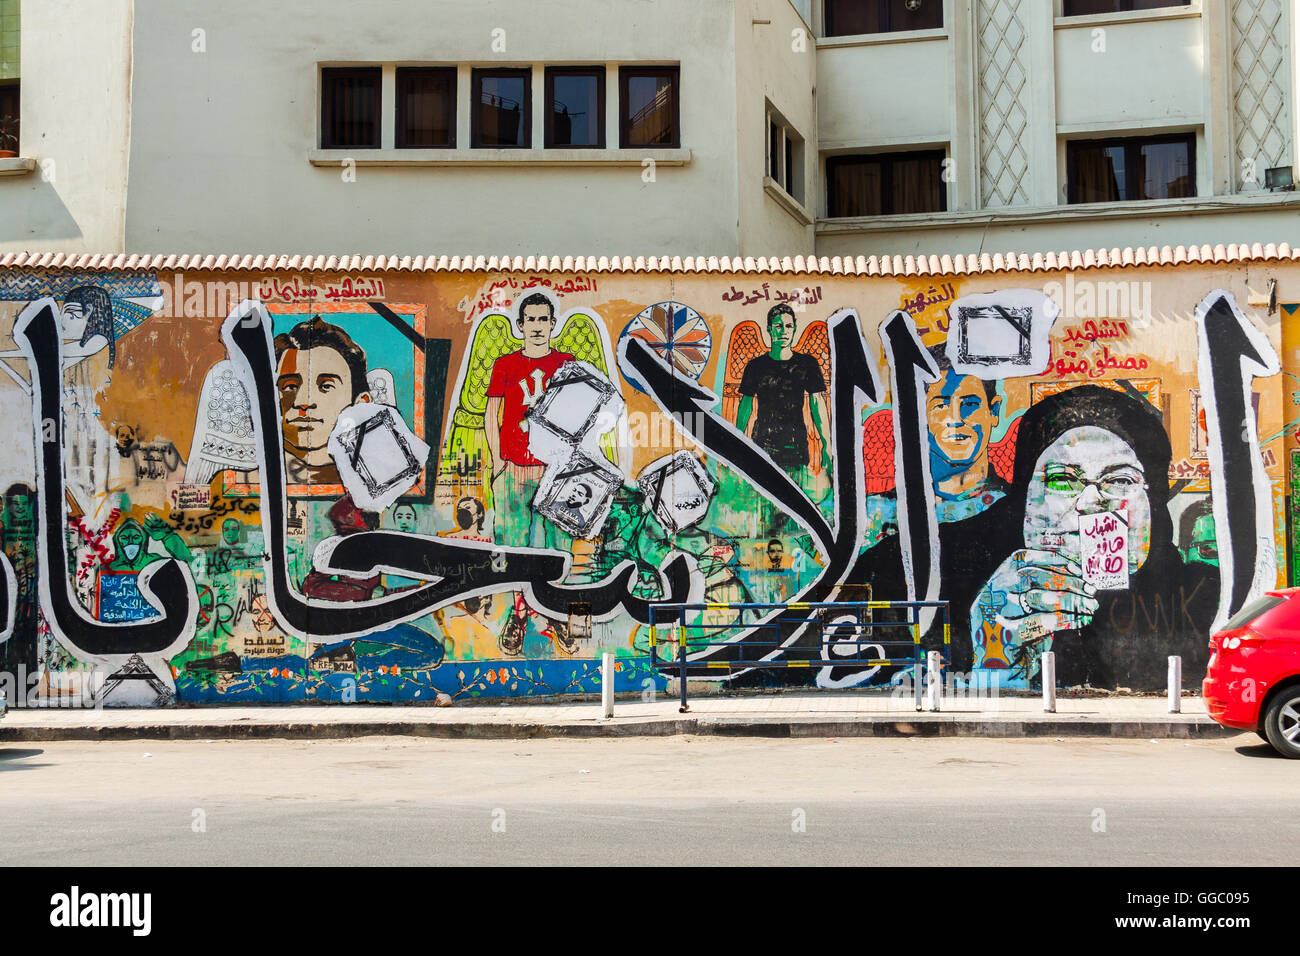 Egypt, Cairo, graffiti of the revolution. Martyrs of Port Said were supporters of Al-Ahly football club, killed in Port Said. Stock Photo